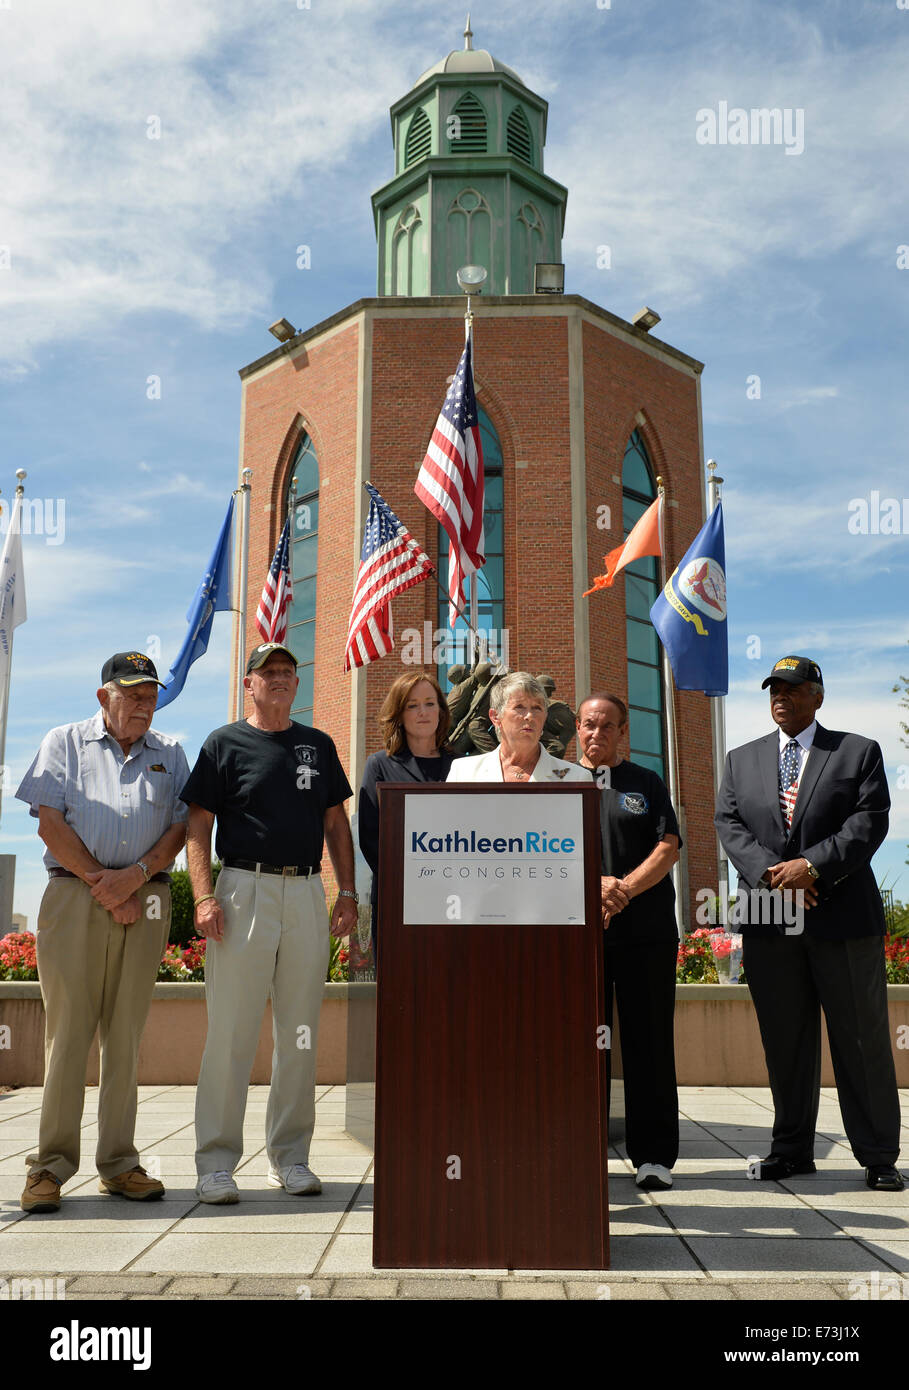 East Meadow, New York, USA. 3rd September, 2014.  Representative CAROLYN MCCARTHY is speaking at podium during press conference when KATHLEEN RICE, (in black jacket dress) Democratic congressional candidate (NY-04), releases a whitepaper on veterans policy and announces formation of her campaign's Veterans Advisory Committee, at Veterans Memorial at Eisenhower Park, after touring Northport VA Medical Center with McCarthy. Congresswoman McCarthy and 4 committee members joined Rice for announcement: PAUL ZYDOR, (in blue shirt) of Merrick, U.S. Credit:  Ann E Parry/Alamy Live News Stock Photo